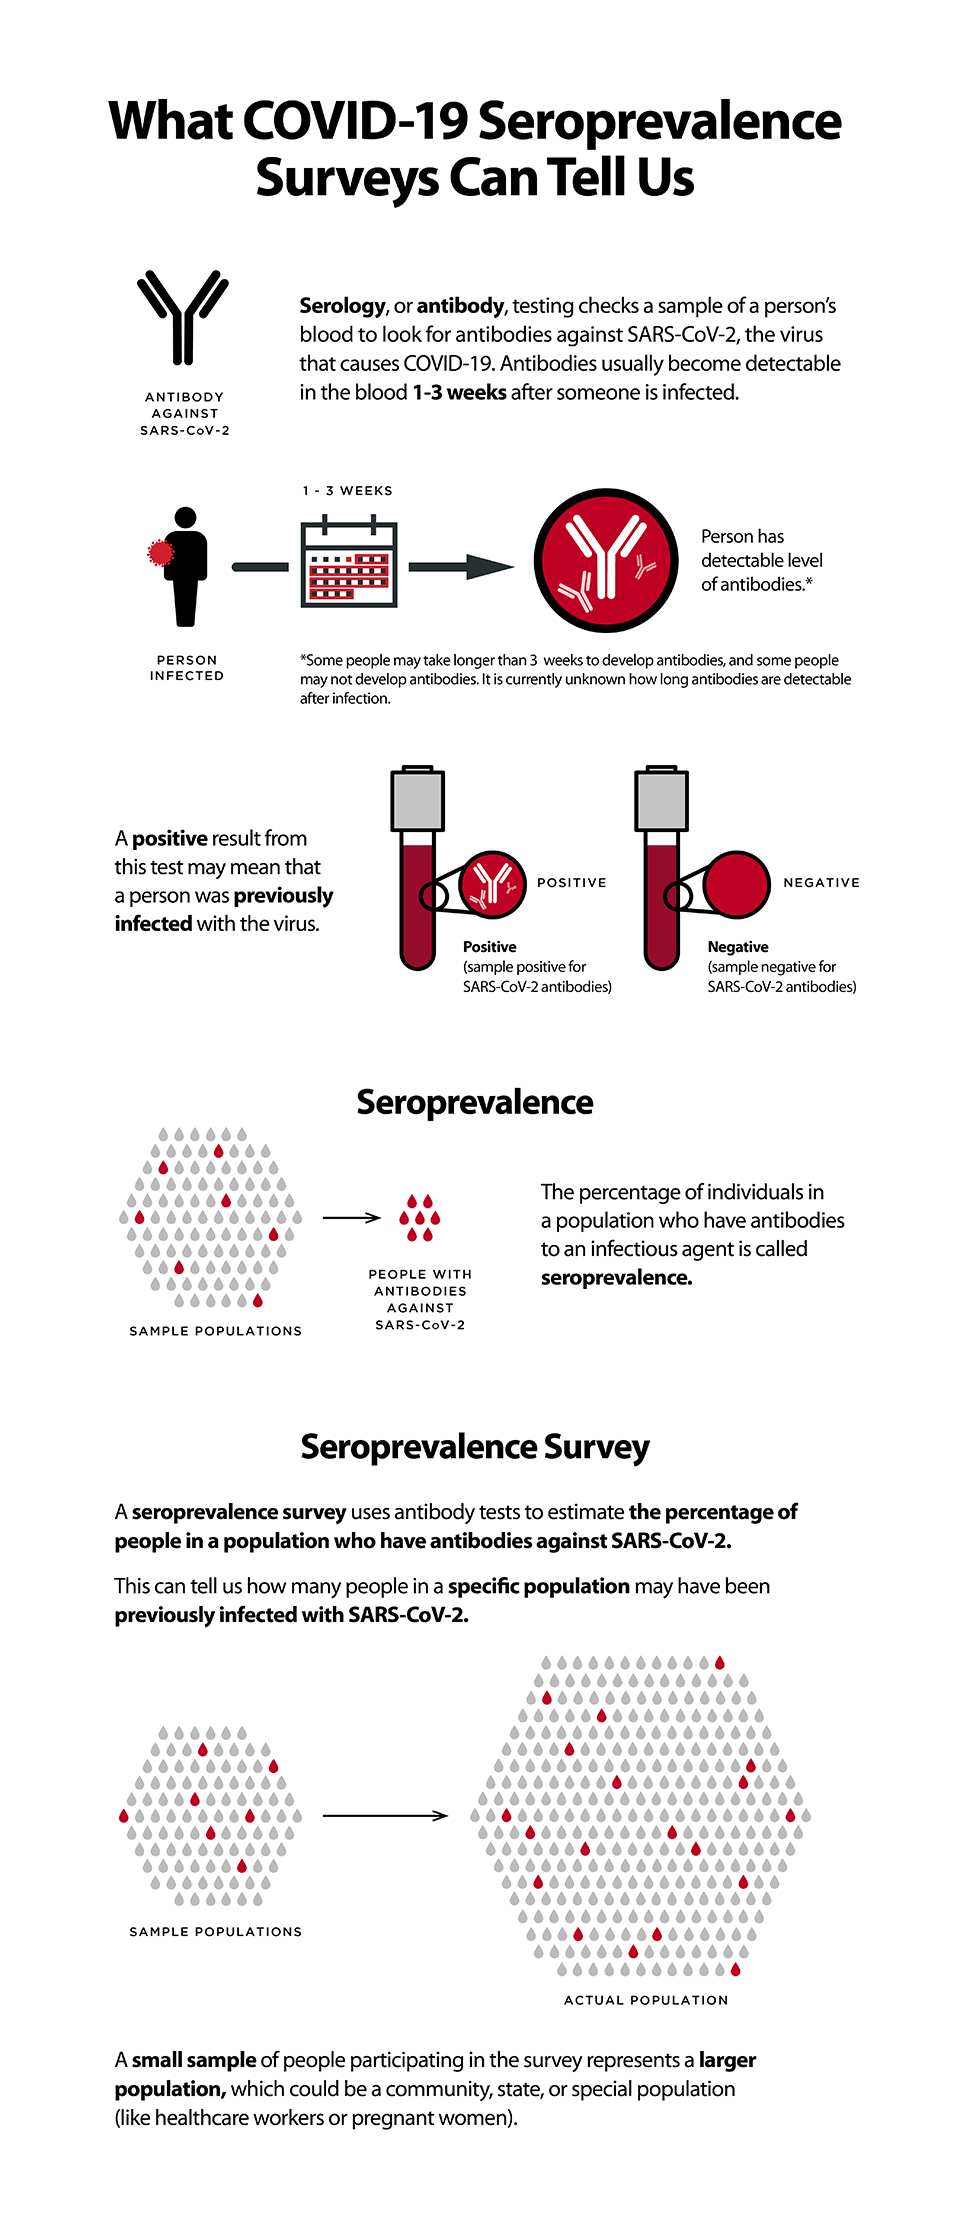 What COVID-19 seroprevalence surveys can tell us